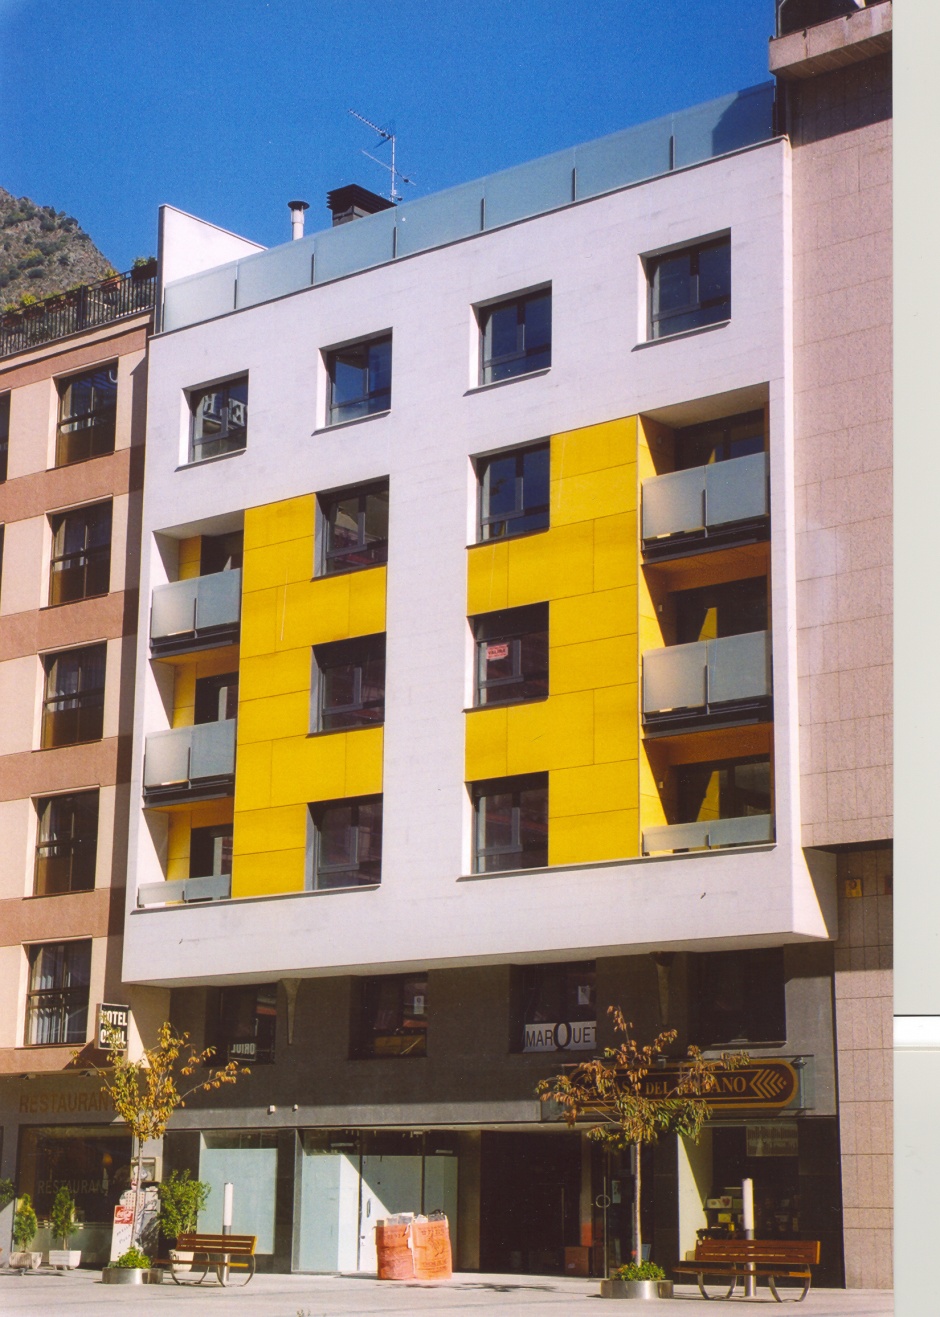 Residential building located at Coprínceps square, 3, Architecture (Principality of Andorra)